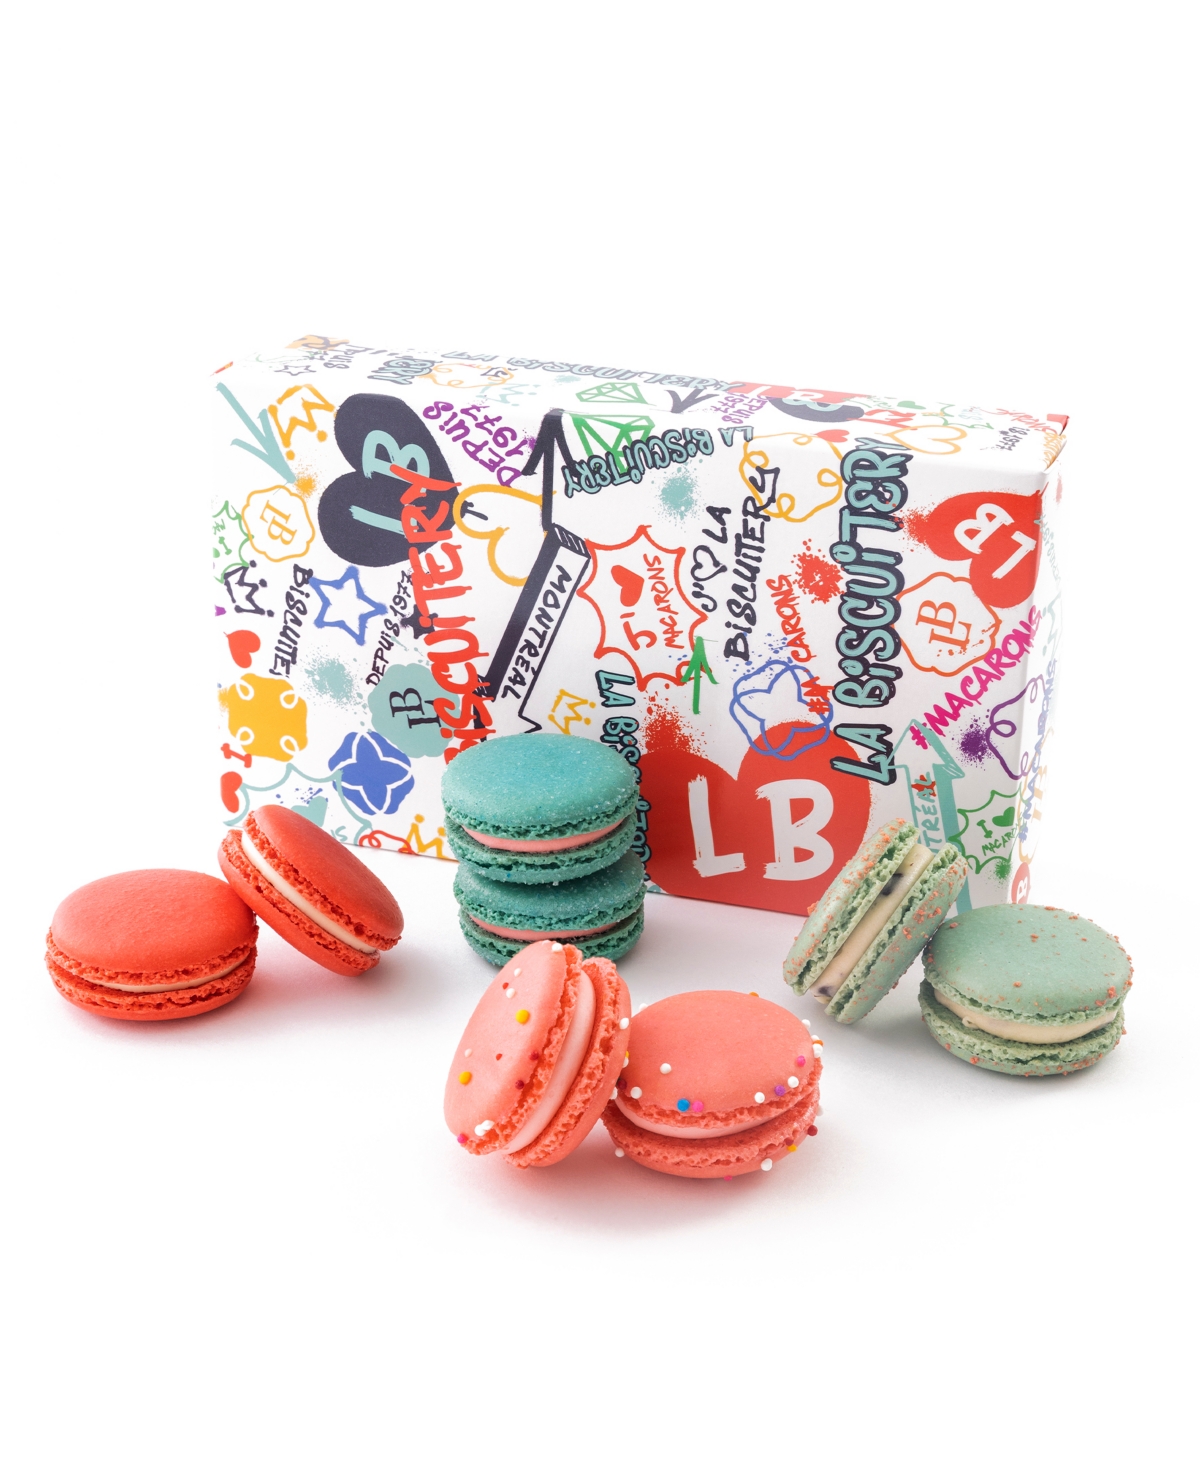 La Biscuitery The Graffiti Edition Box Of 12 Macarons In No Color